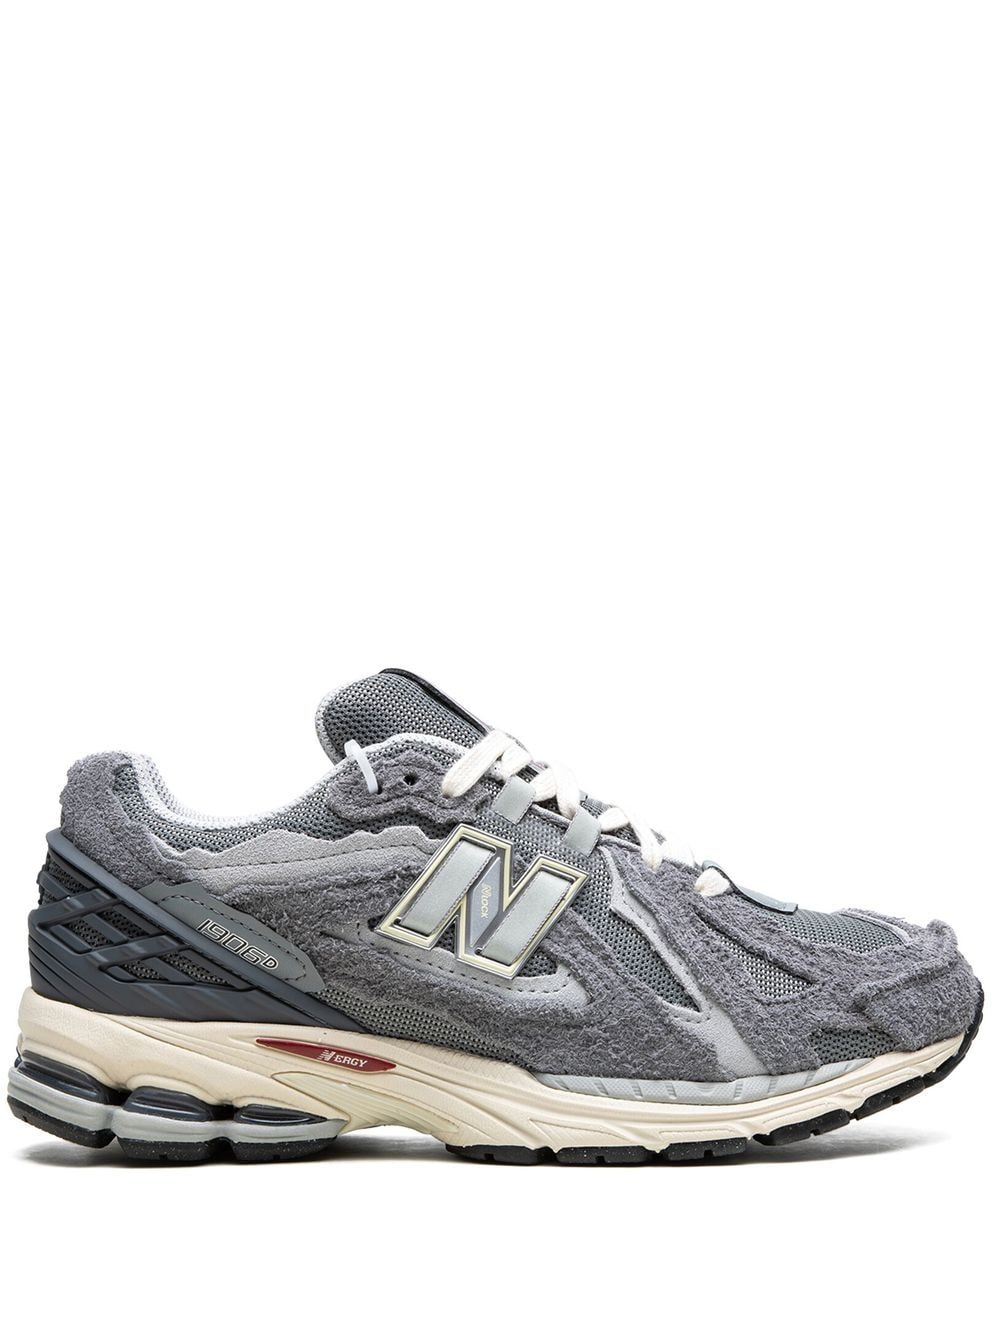 New Balance 1906R "Protection Pack - Grey" sneakers von New Balance